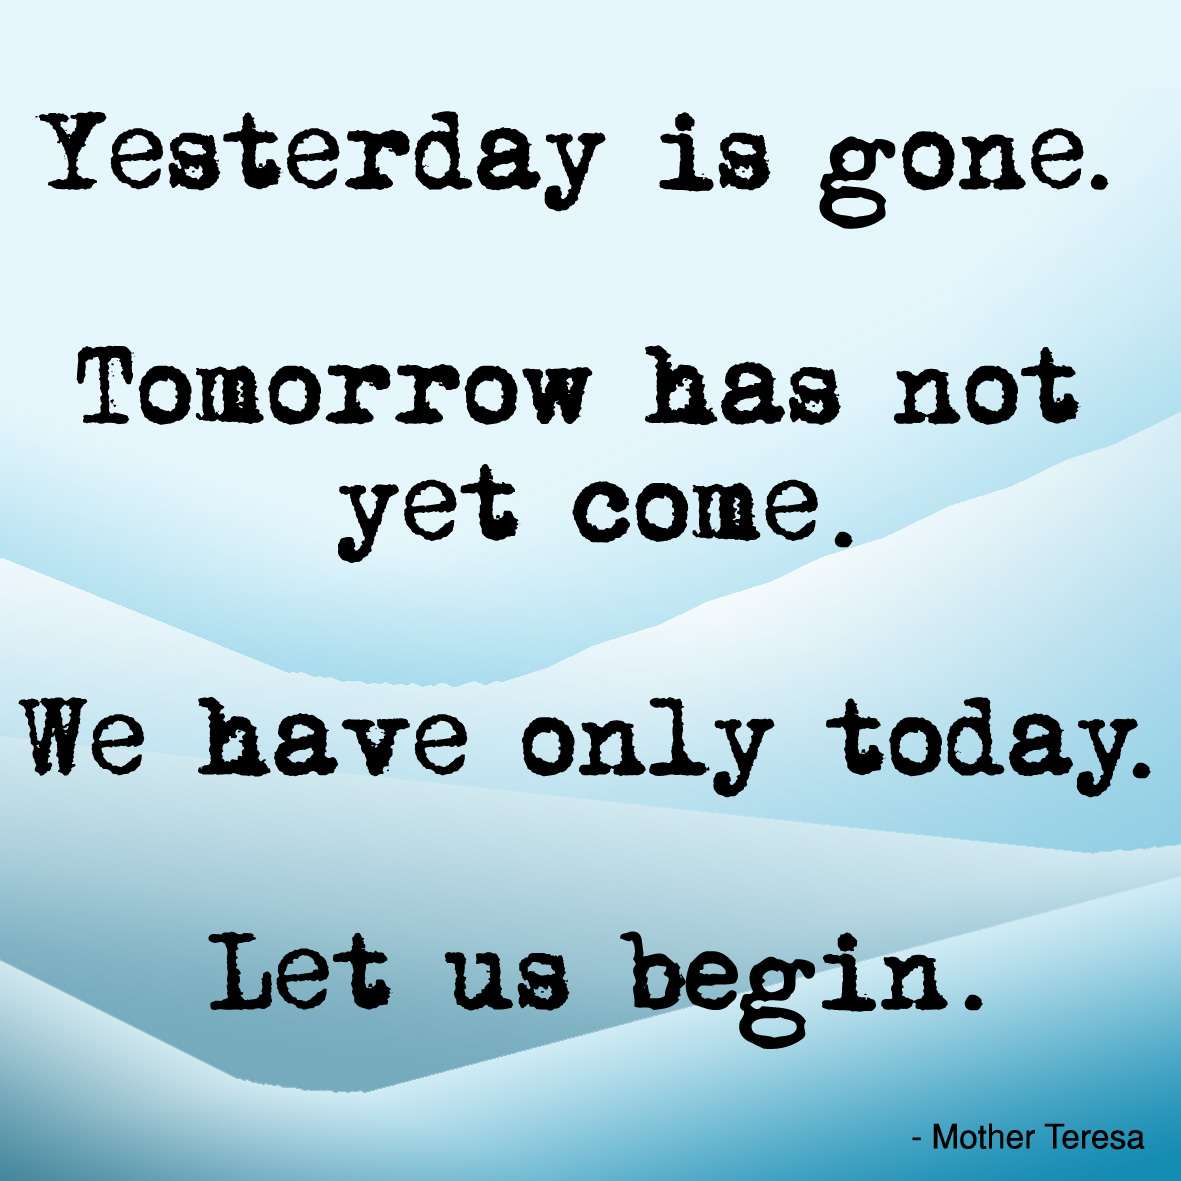 Has not arrived yet. Yesterday is gone tomorrow. Not yet. Let us begin. Are we coming yet.